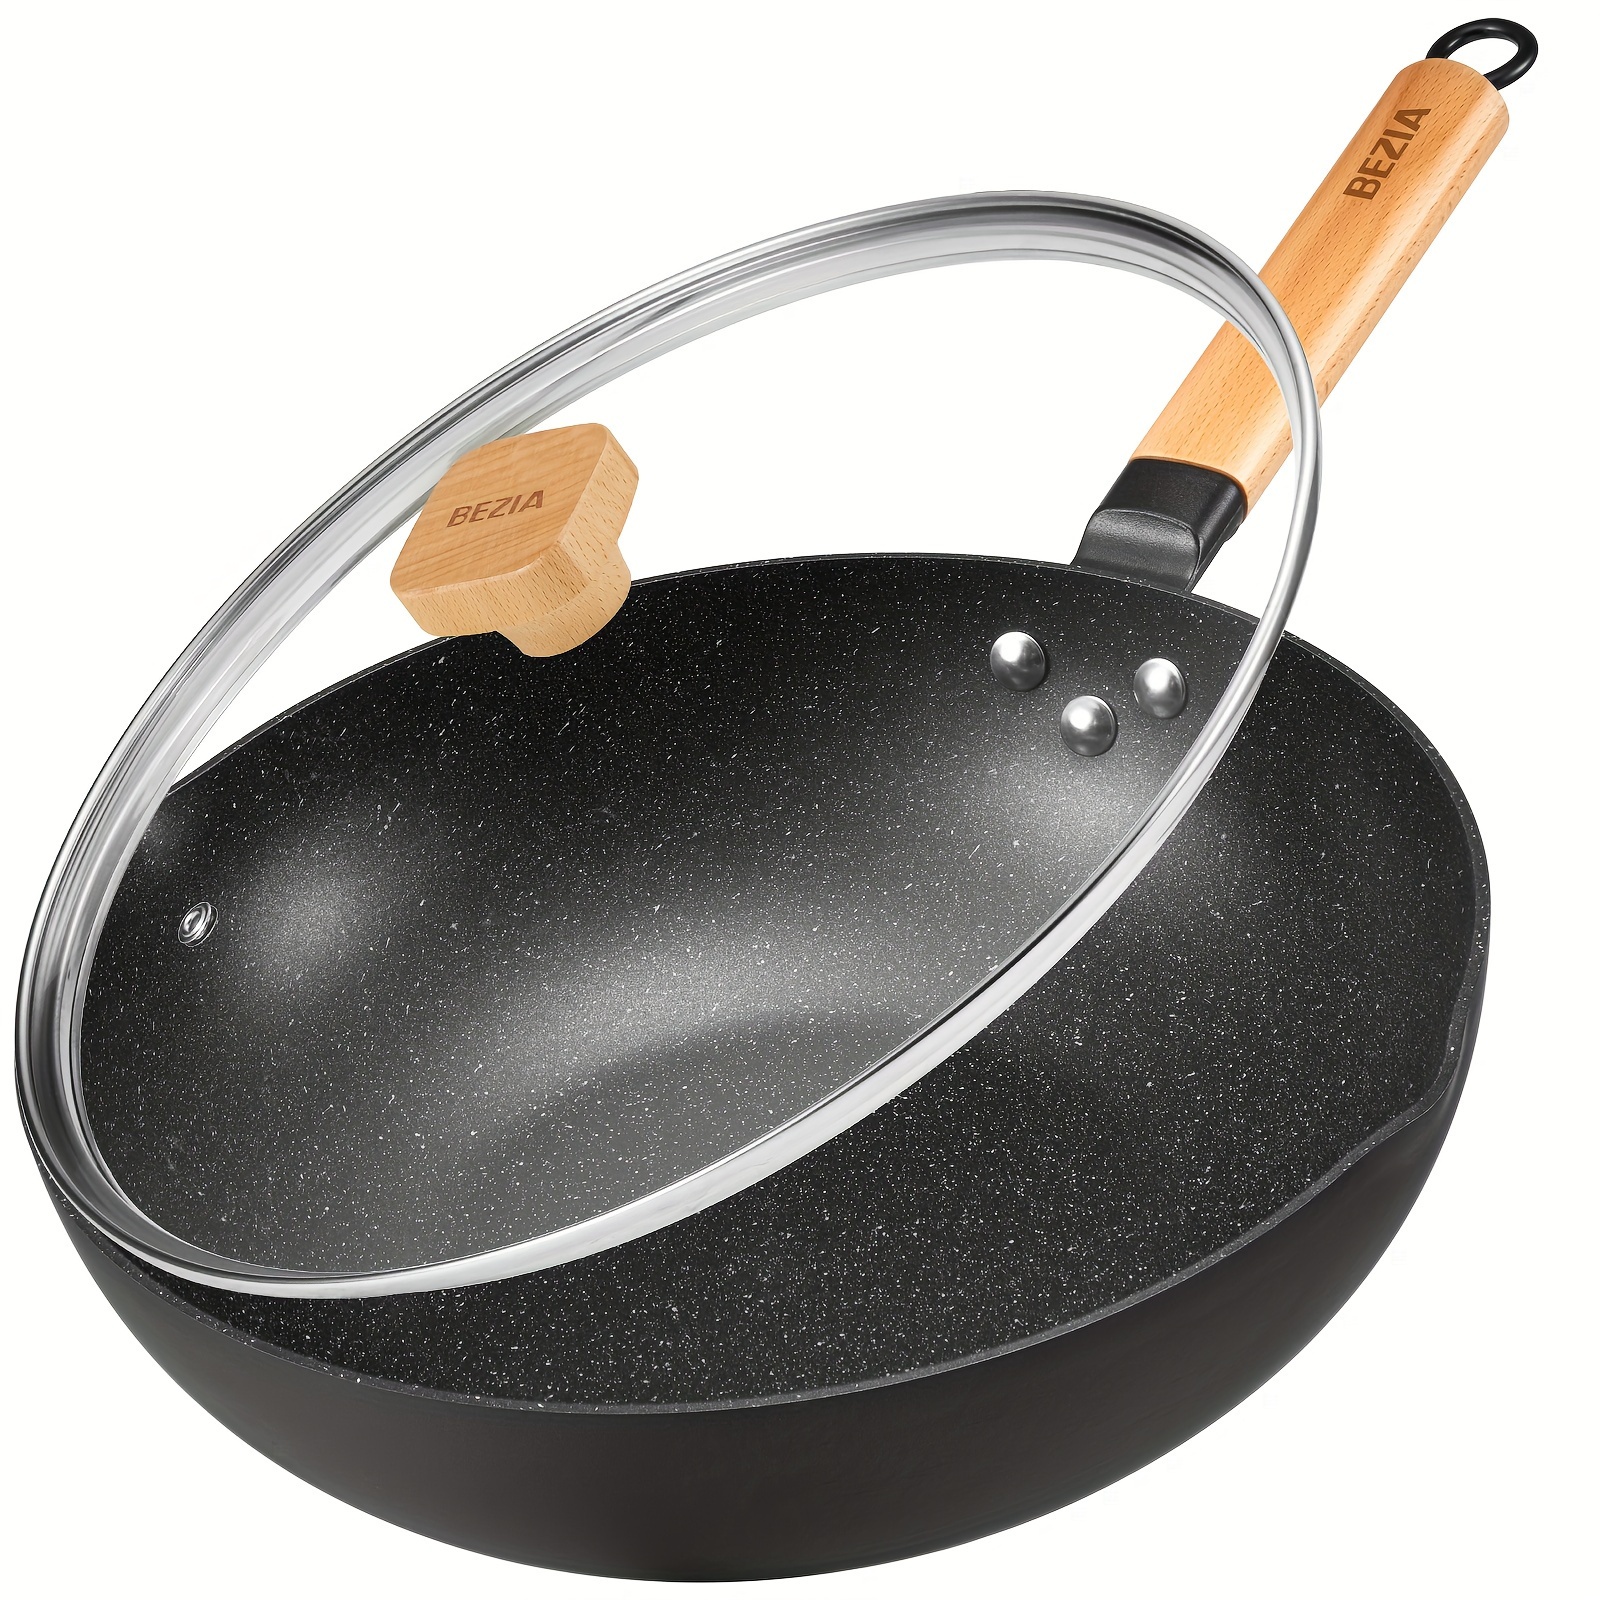 

Inductions Wok With Lid, 12 Inch Non-stick Wok Pan,